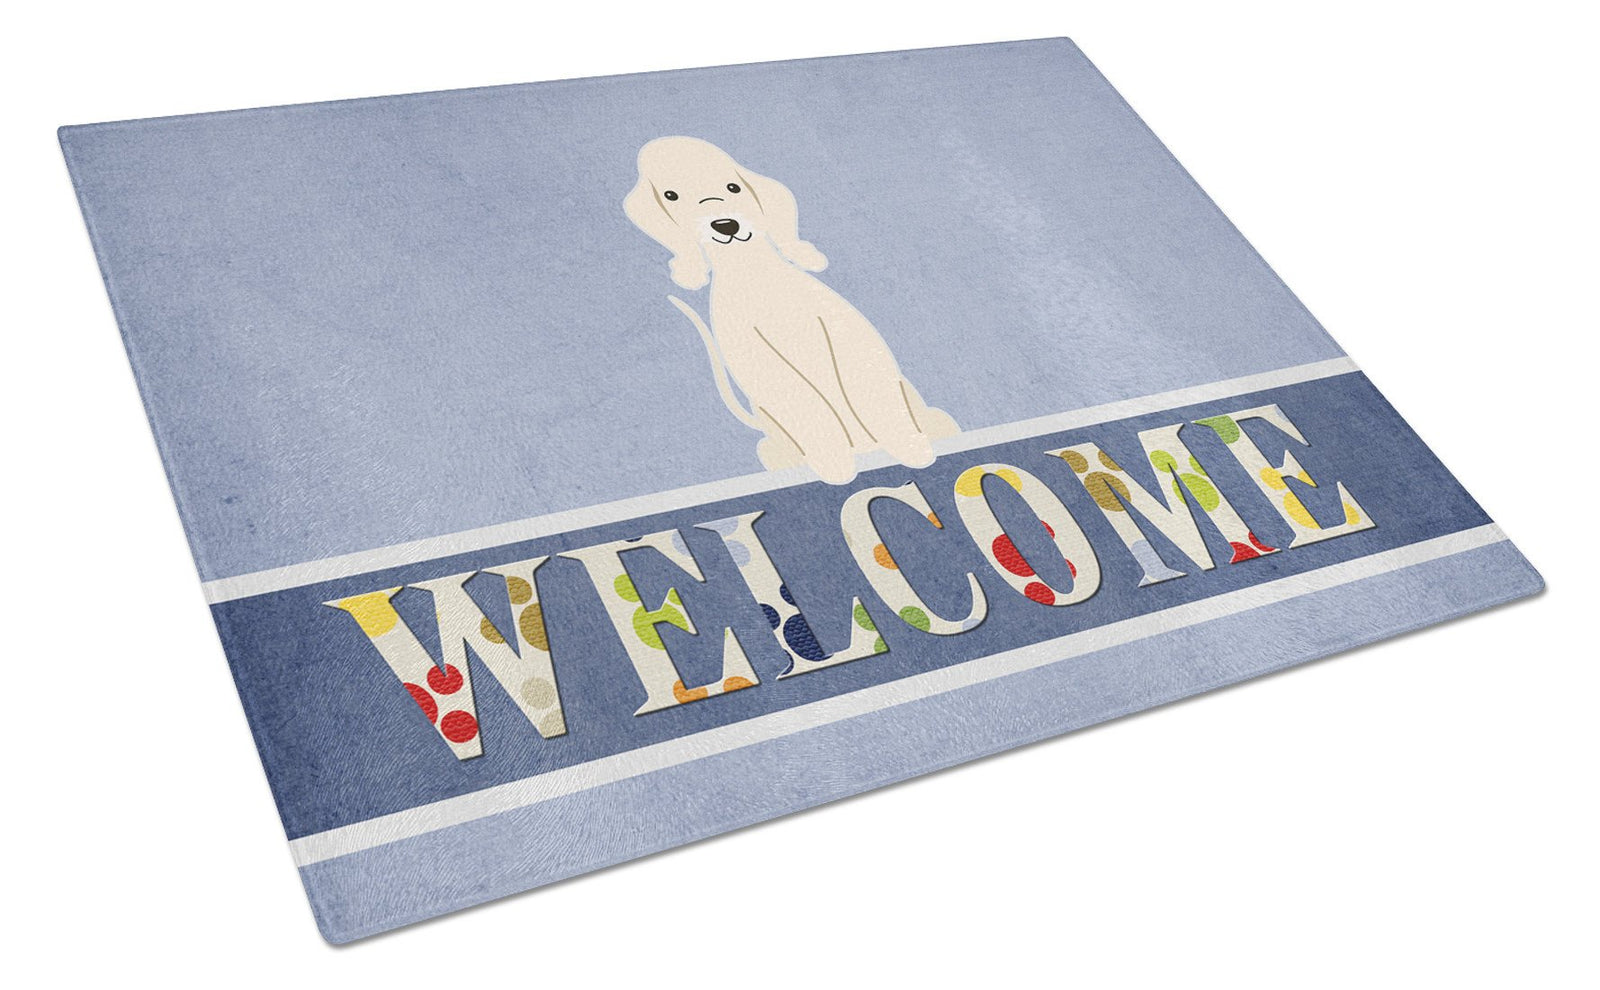 Bedlington Terrier Sandy Welcome Glass Cutting Board Large BB5672LCB by Caroline's Treasures